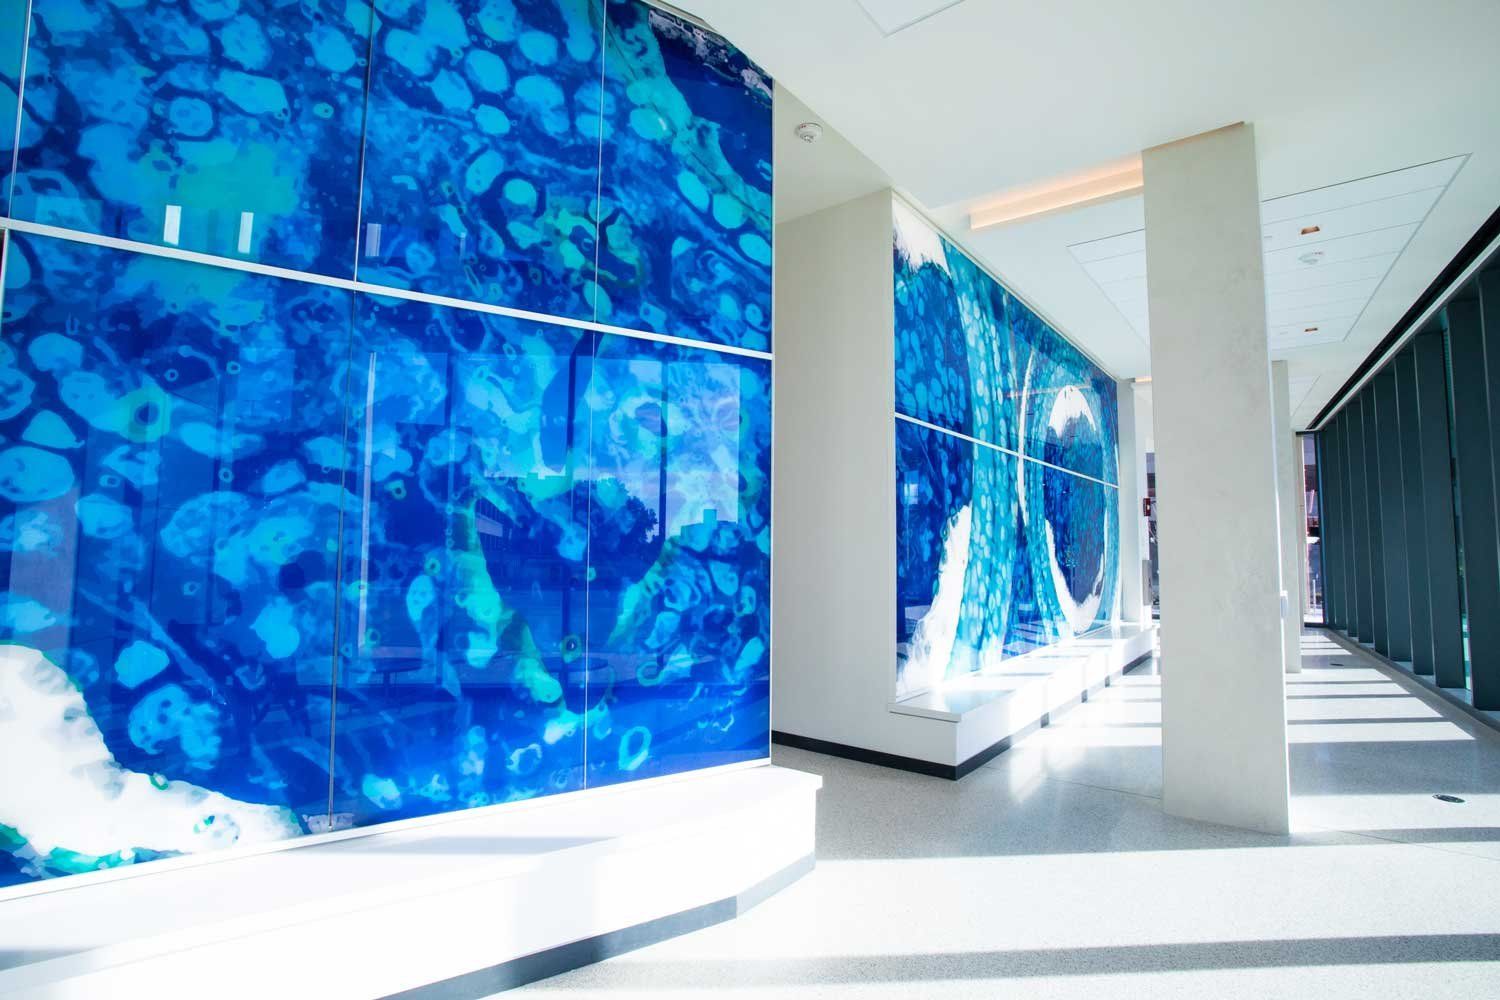 A wall at the NextGen Precision Health Institute in Columbia, Missouri, features panels of blue hues that resemble a microscopic image as part of the Enduring Impermanence art piece.